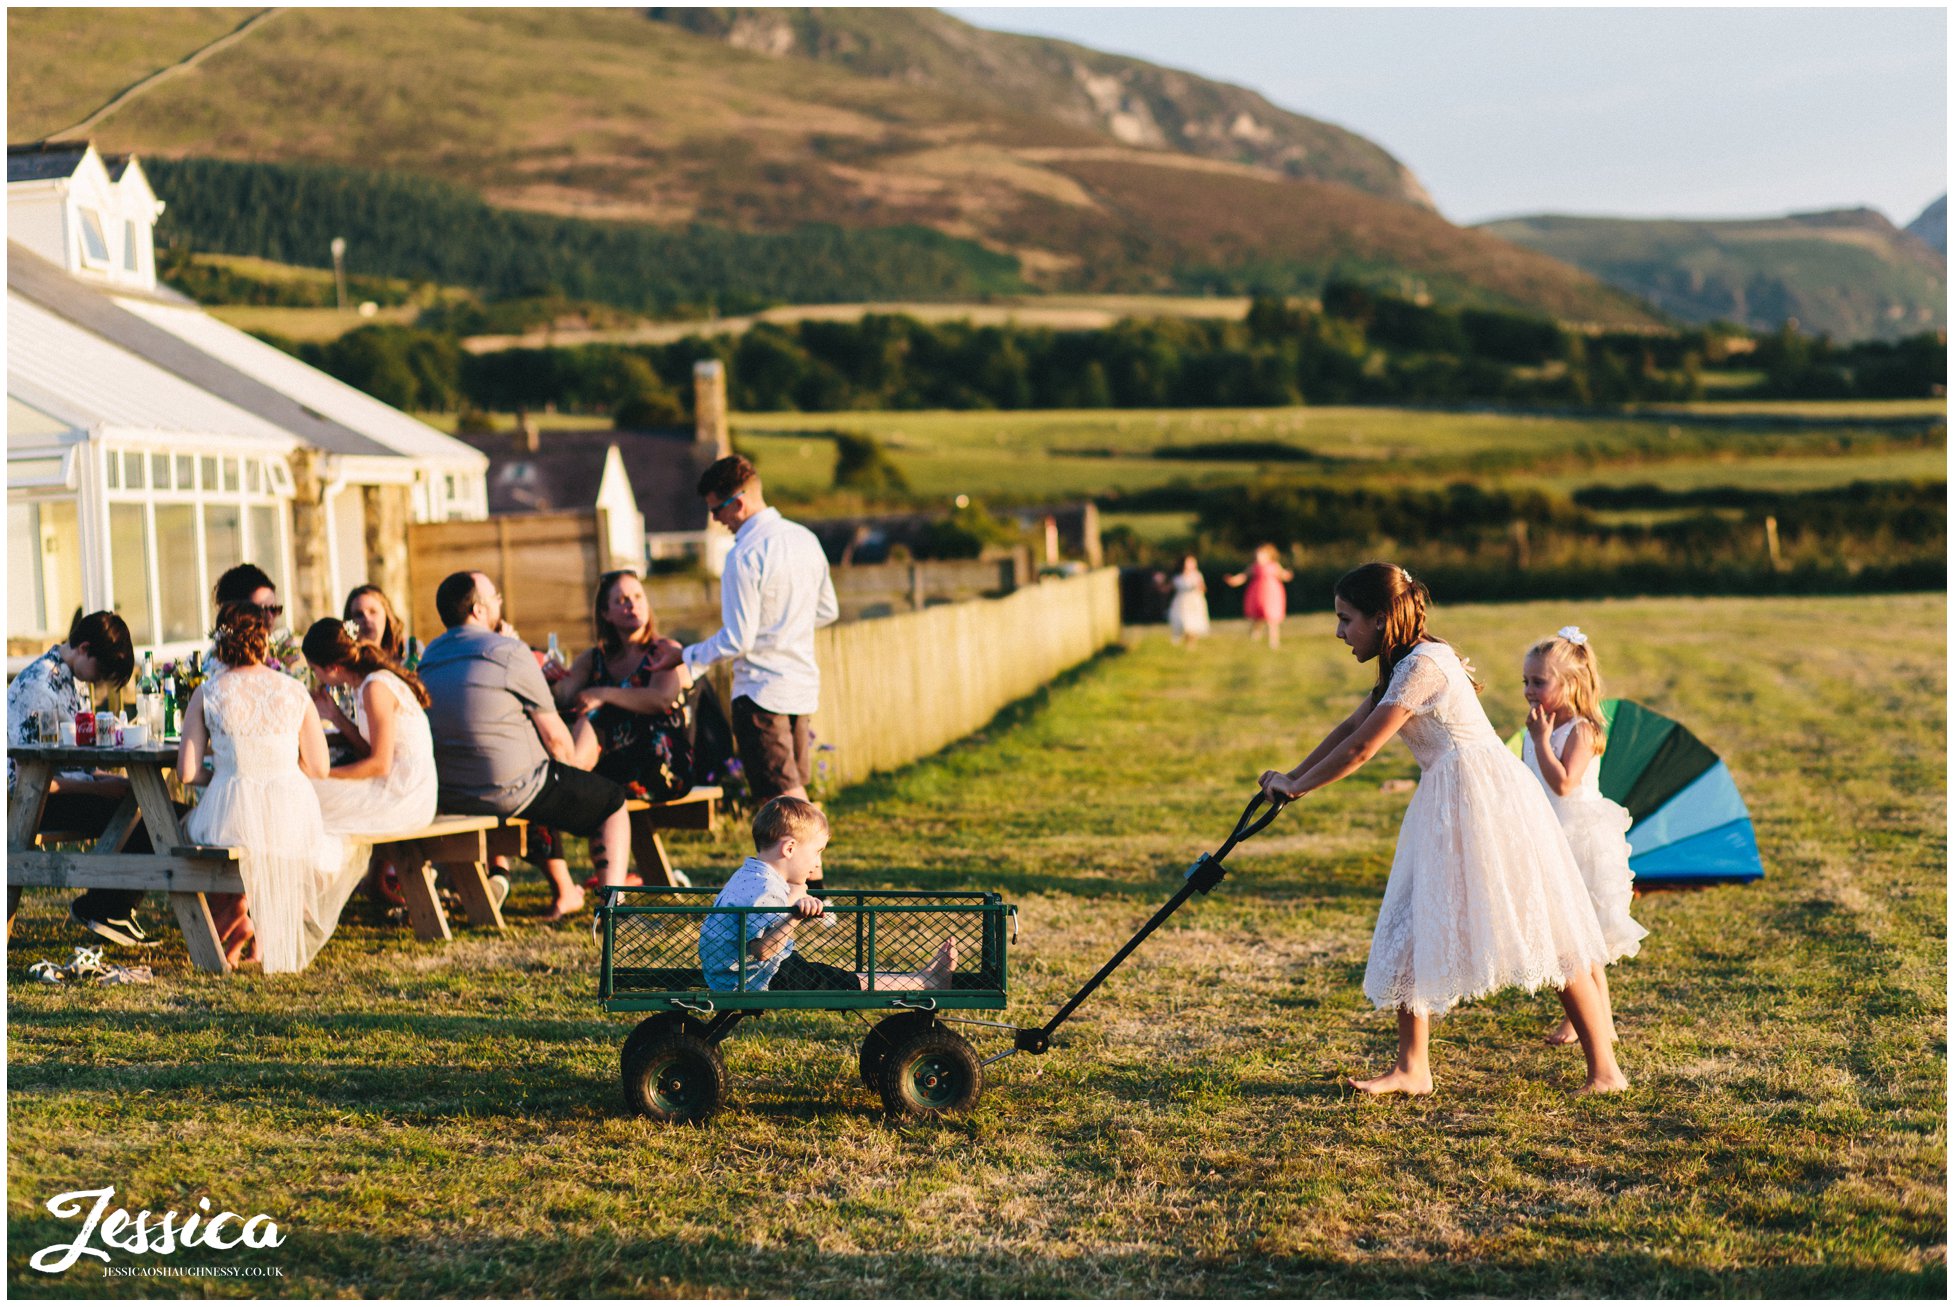 bridesmaid drags young child around in a trailer